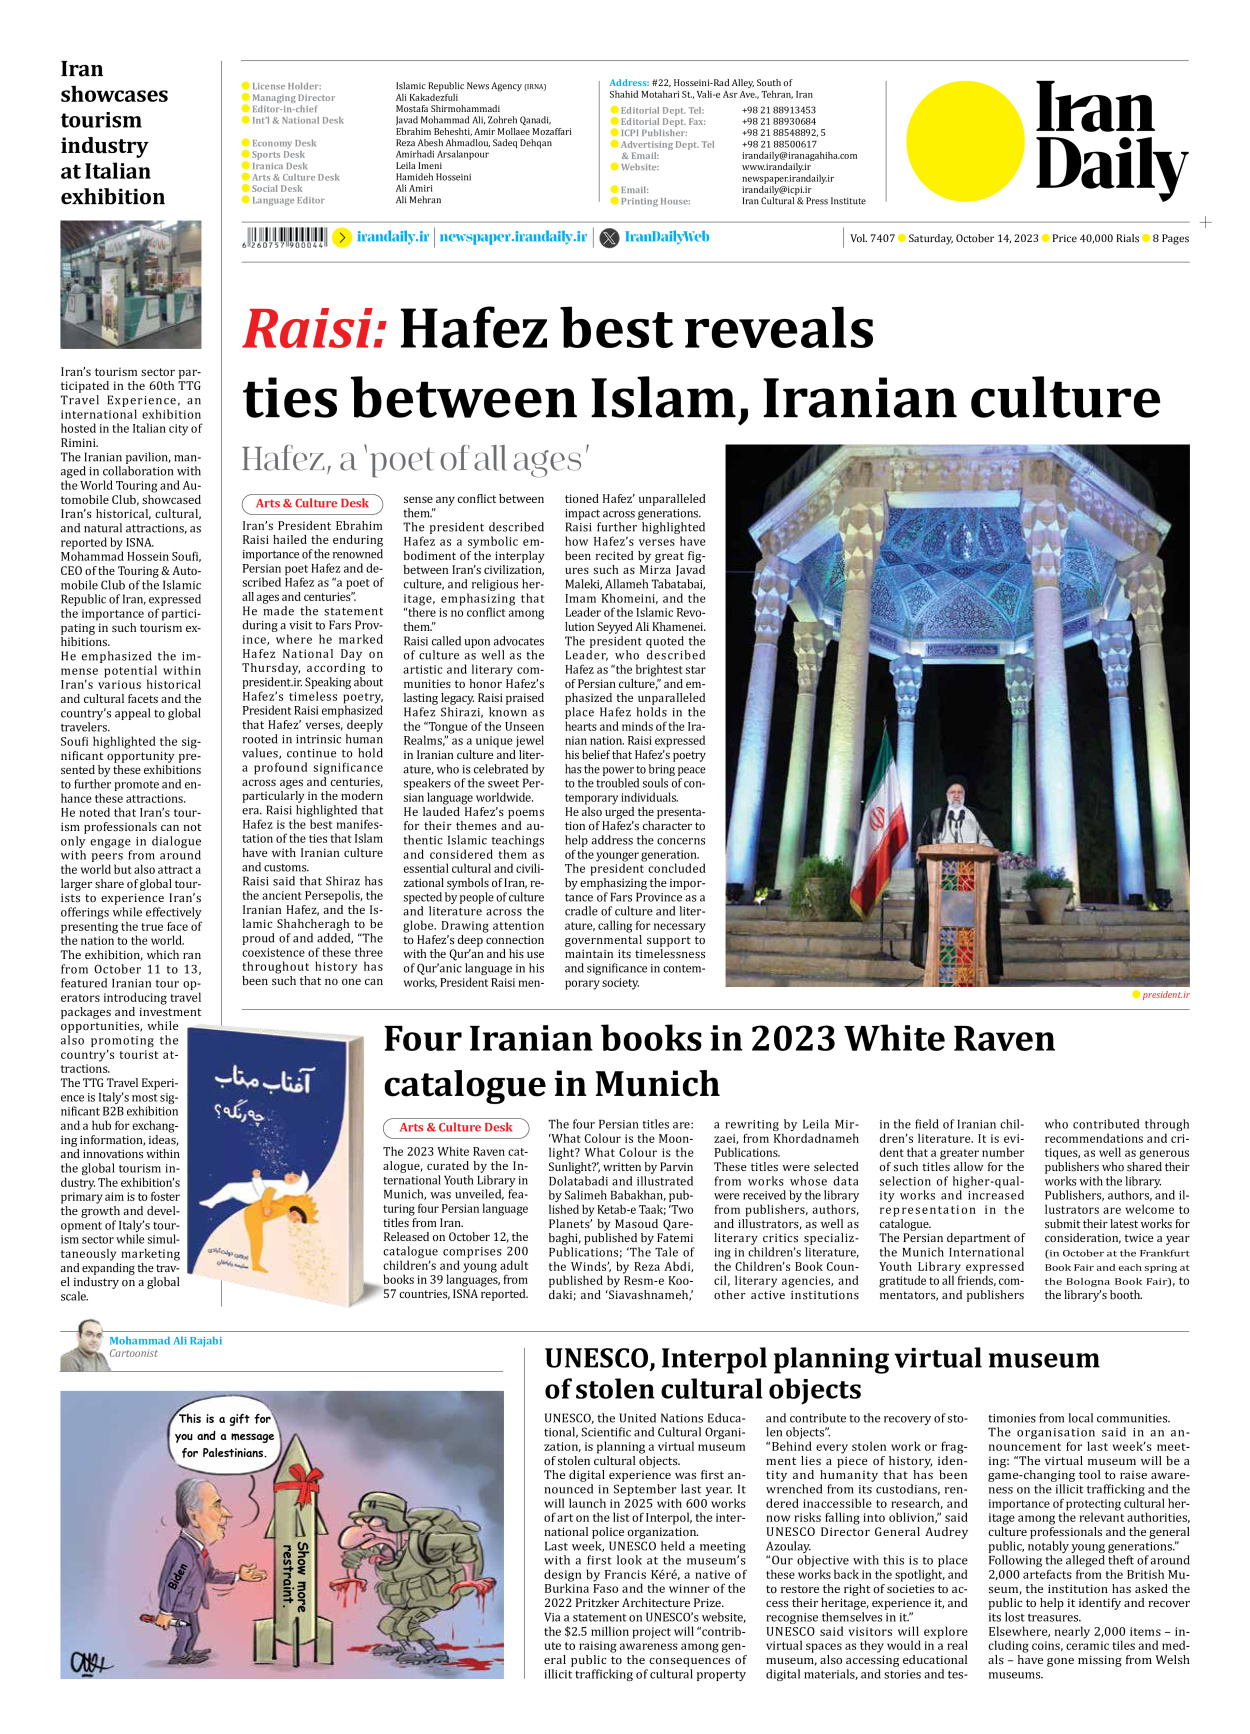 Iran Daily - Number Seven Thousand Four Hundred and Seven - 14 October 2023 - Page 8